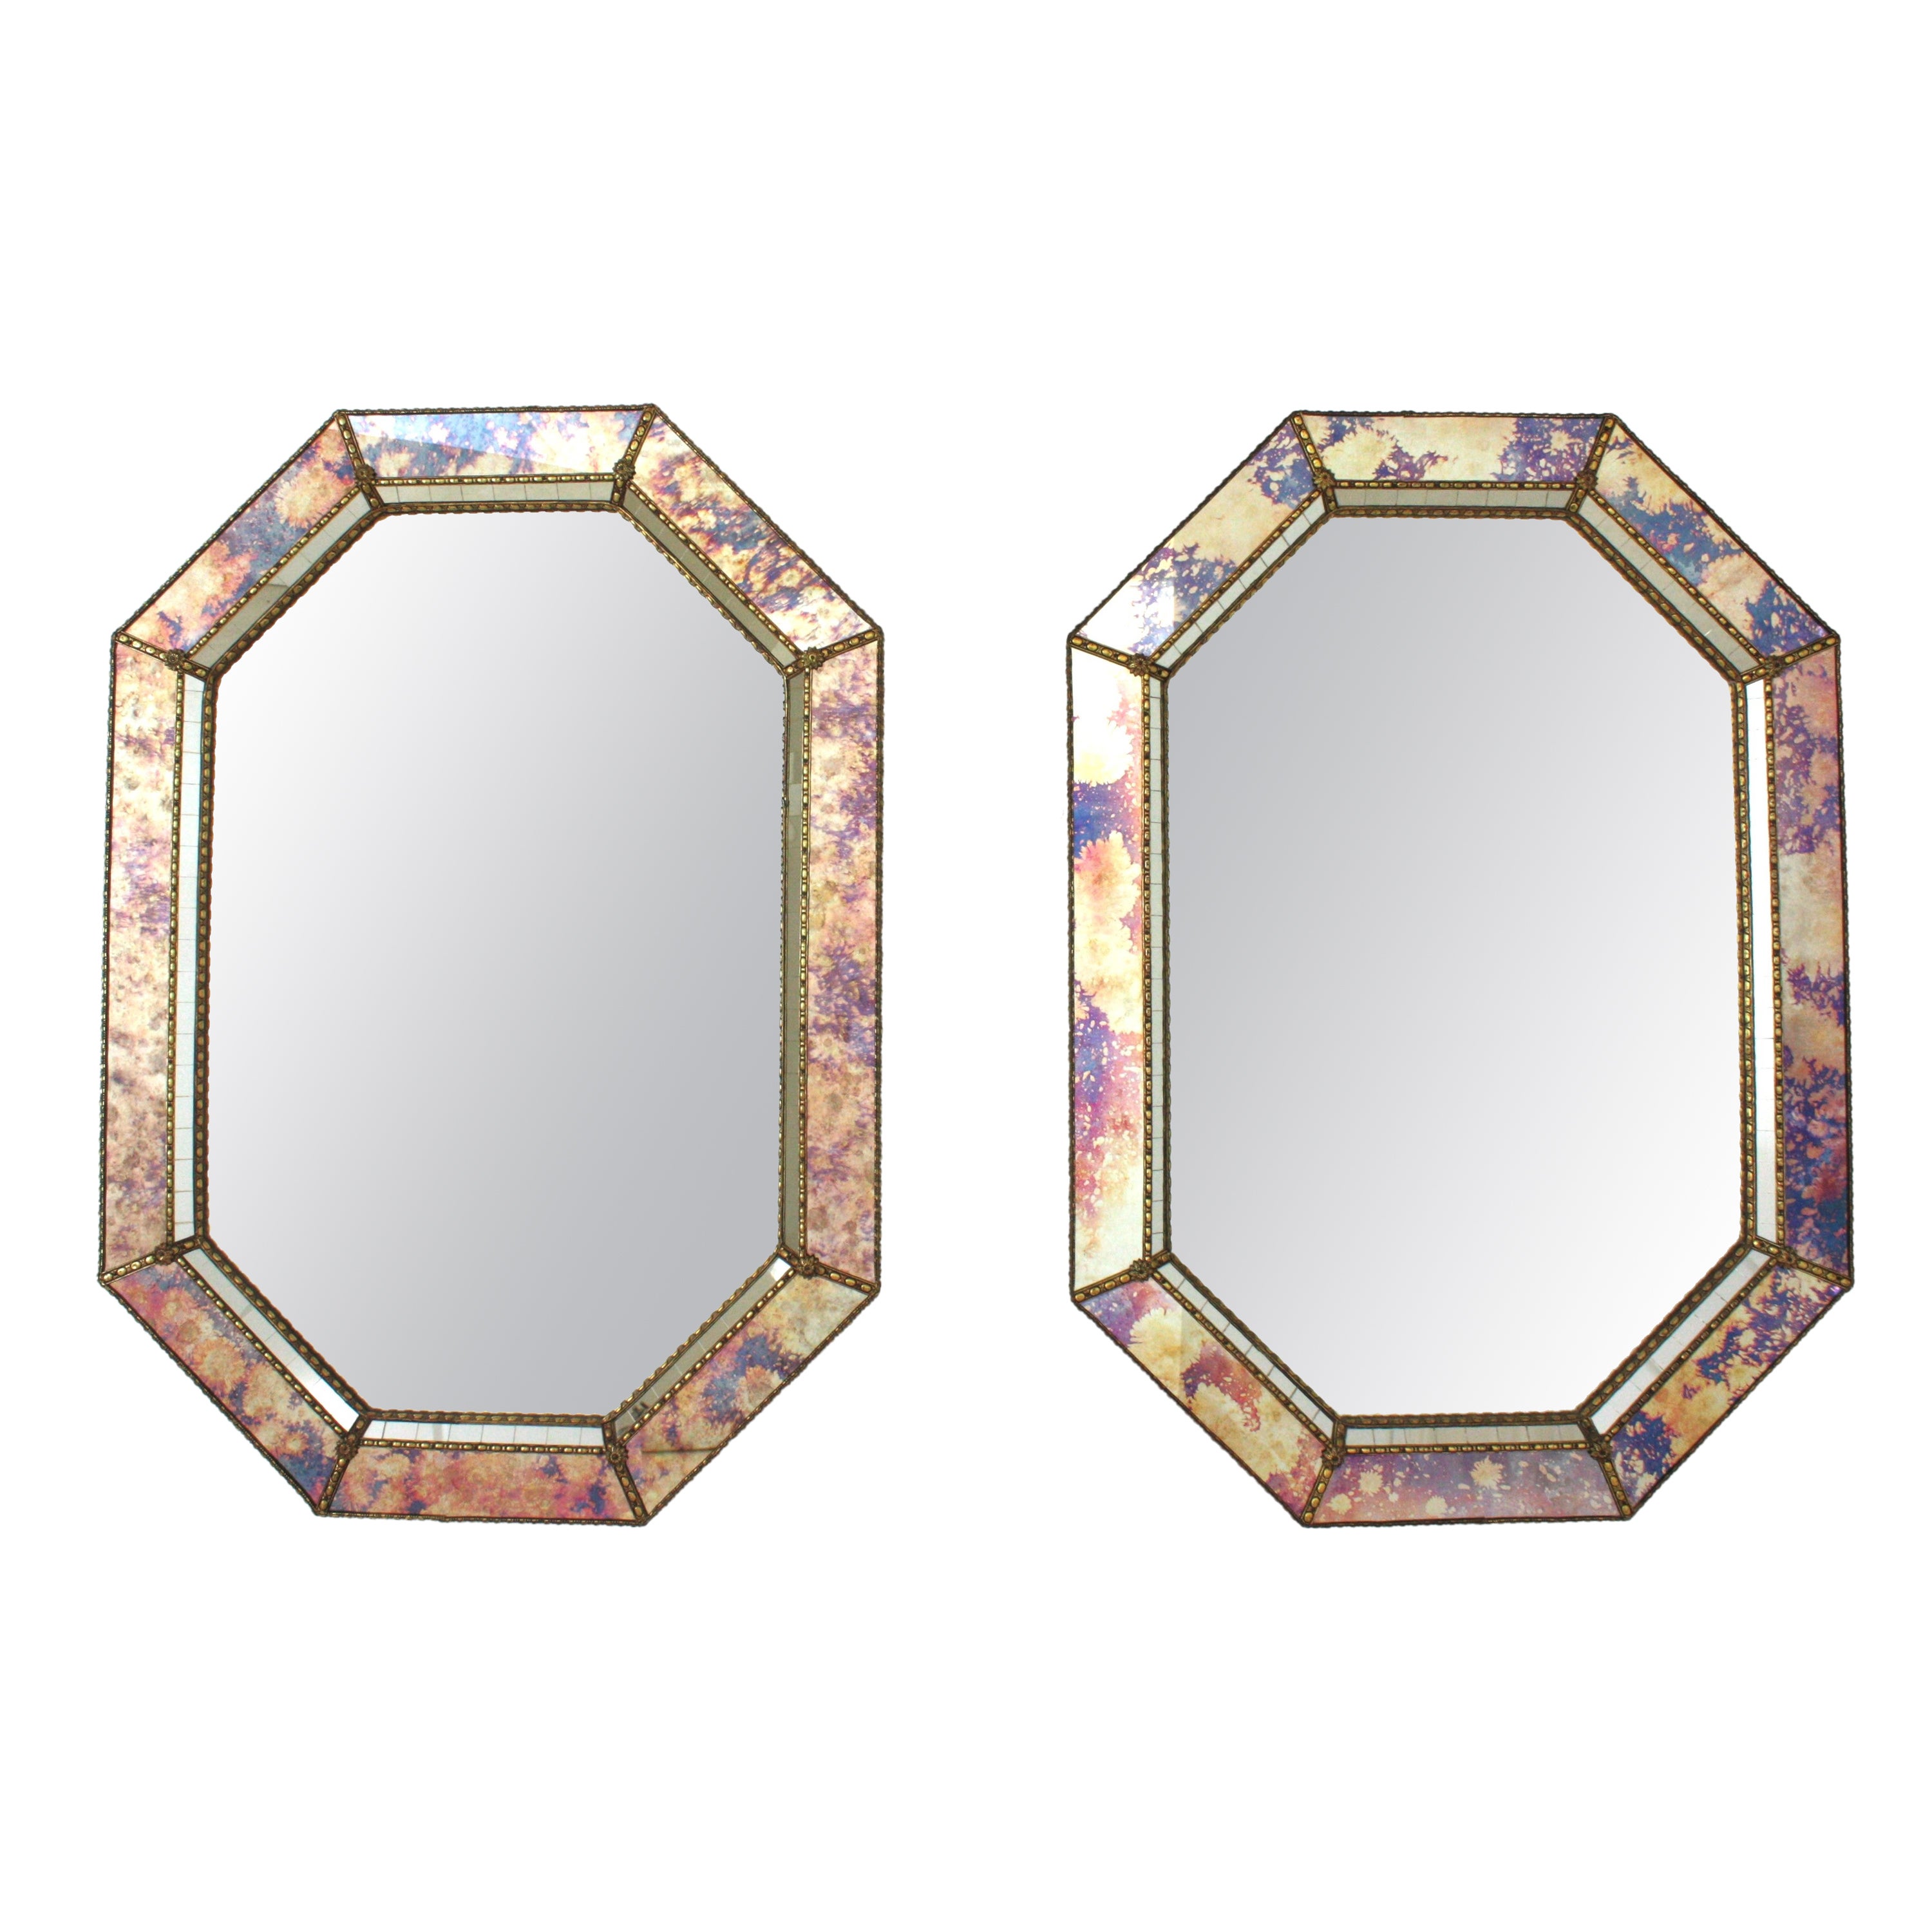 Octagonal Venetian Style Mirrors with Pink Purple Glass & Brass Details, Pair For Sale